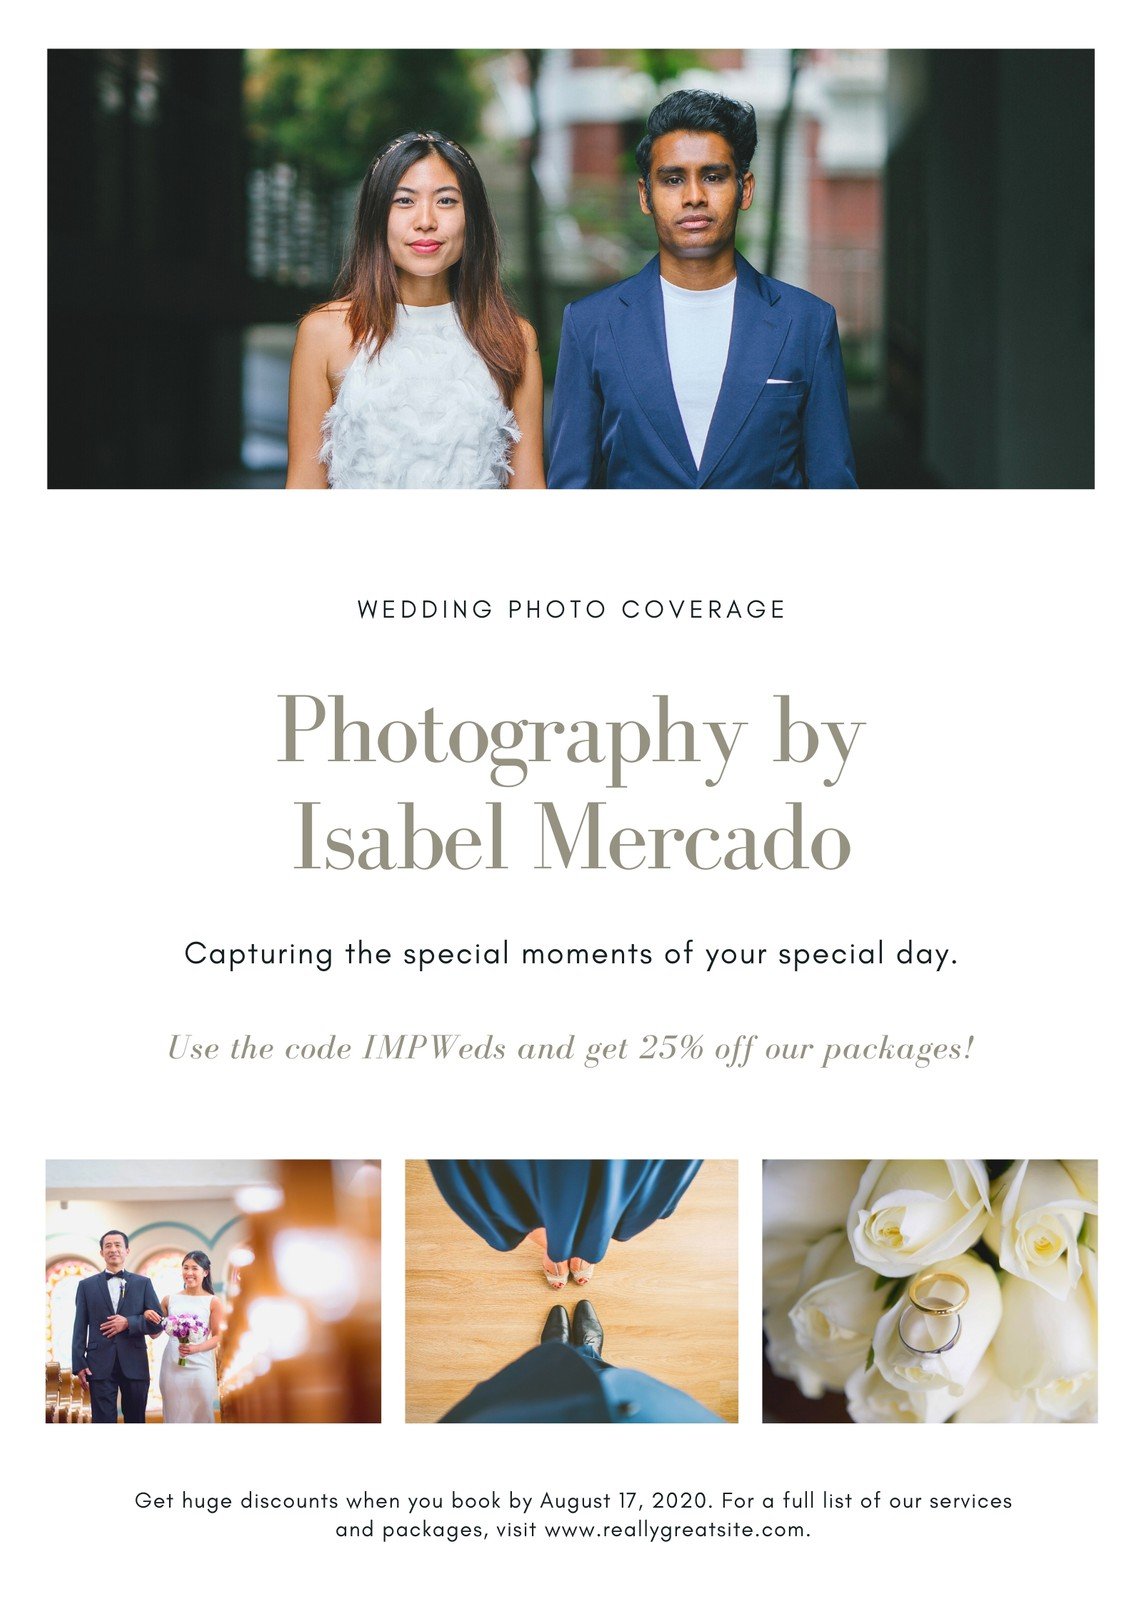 White Wedding Photography Flyer Templates by Canva